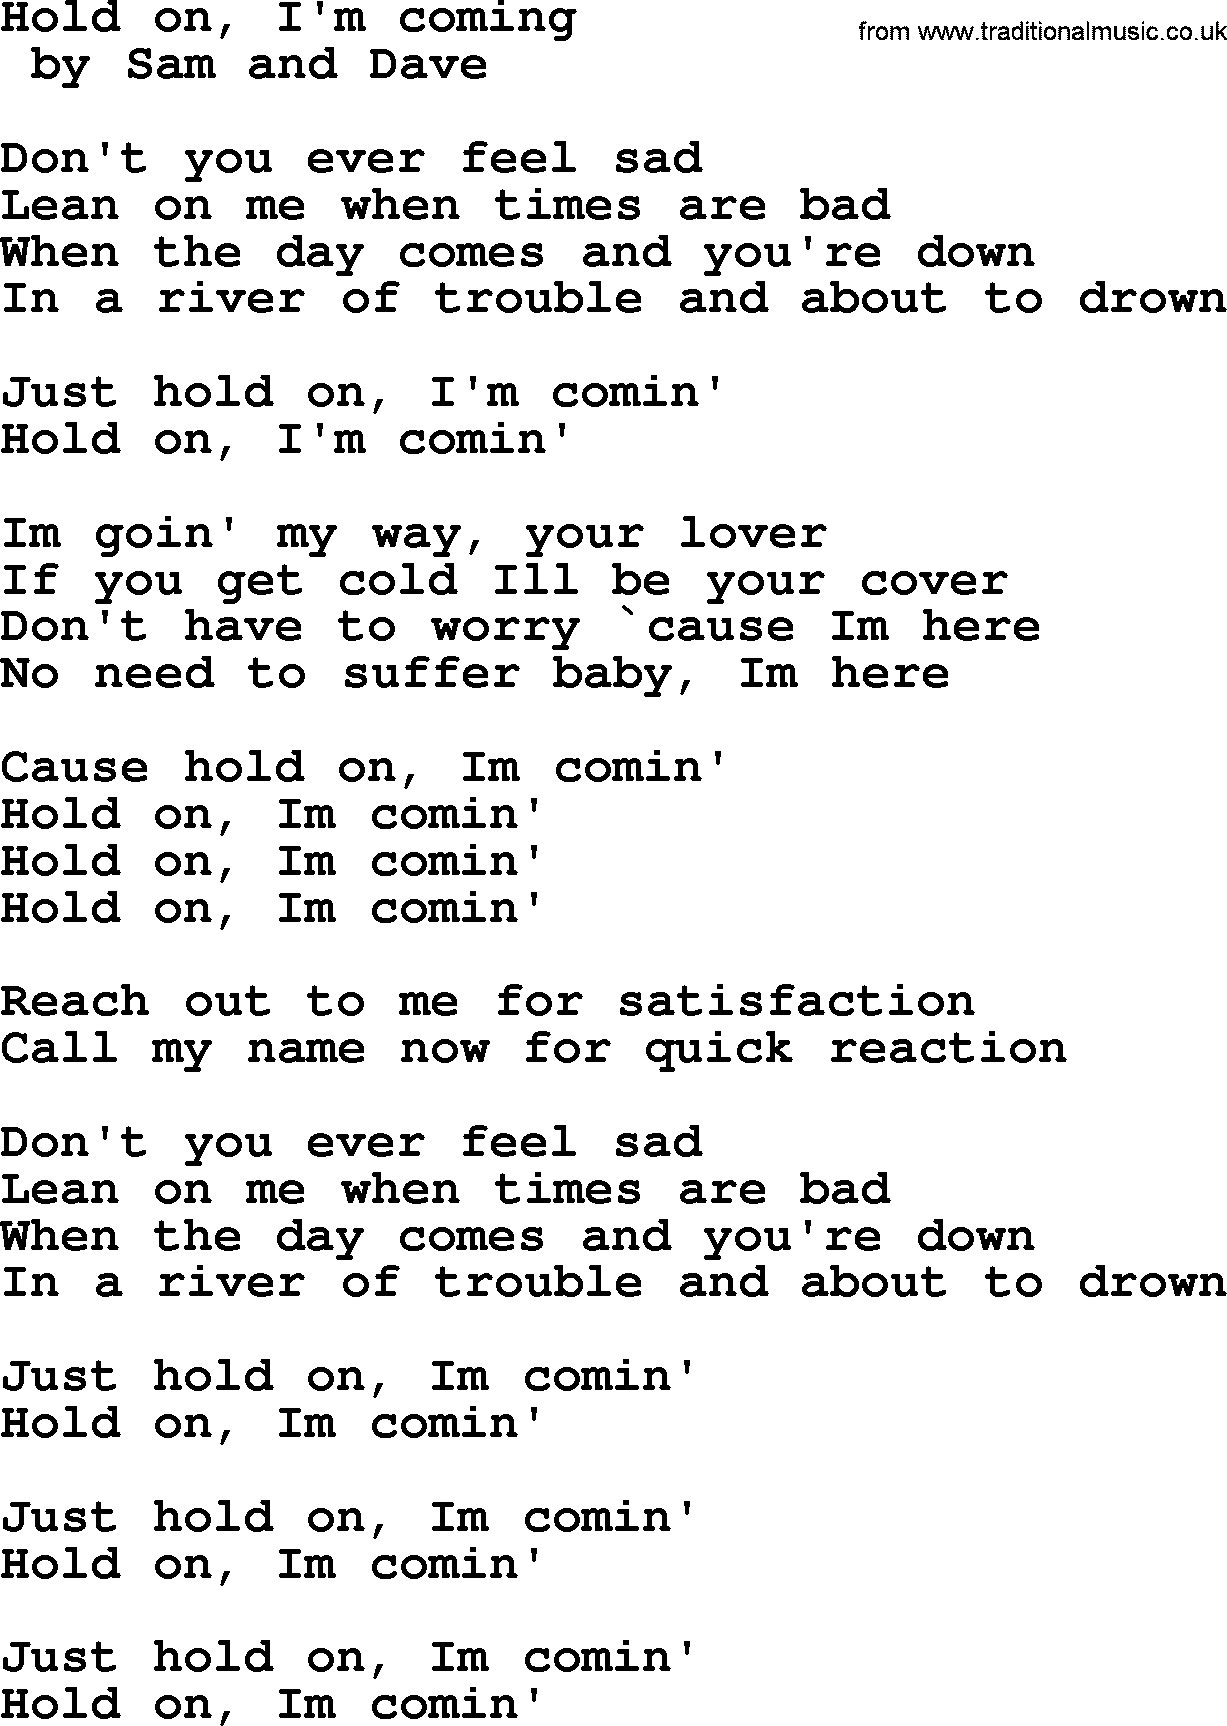 Bruce Springsteen song: Hold On, I'm Coming lyrics